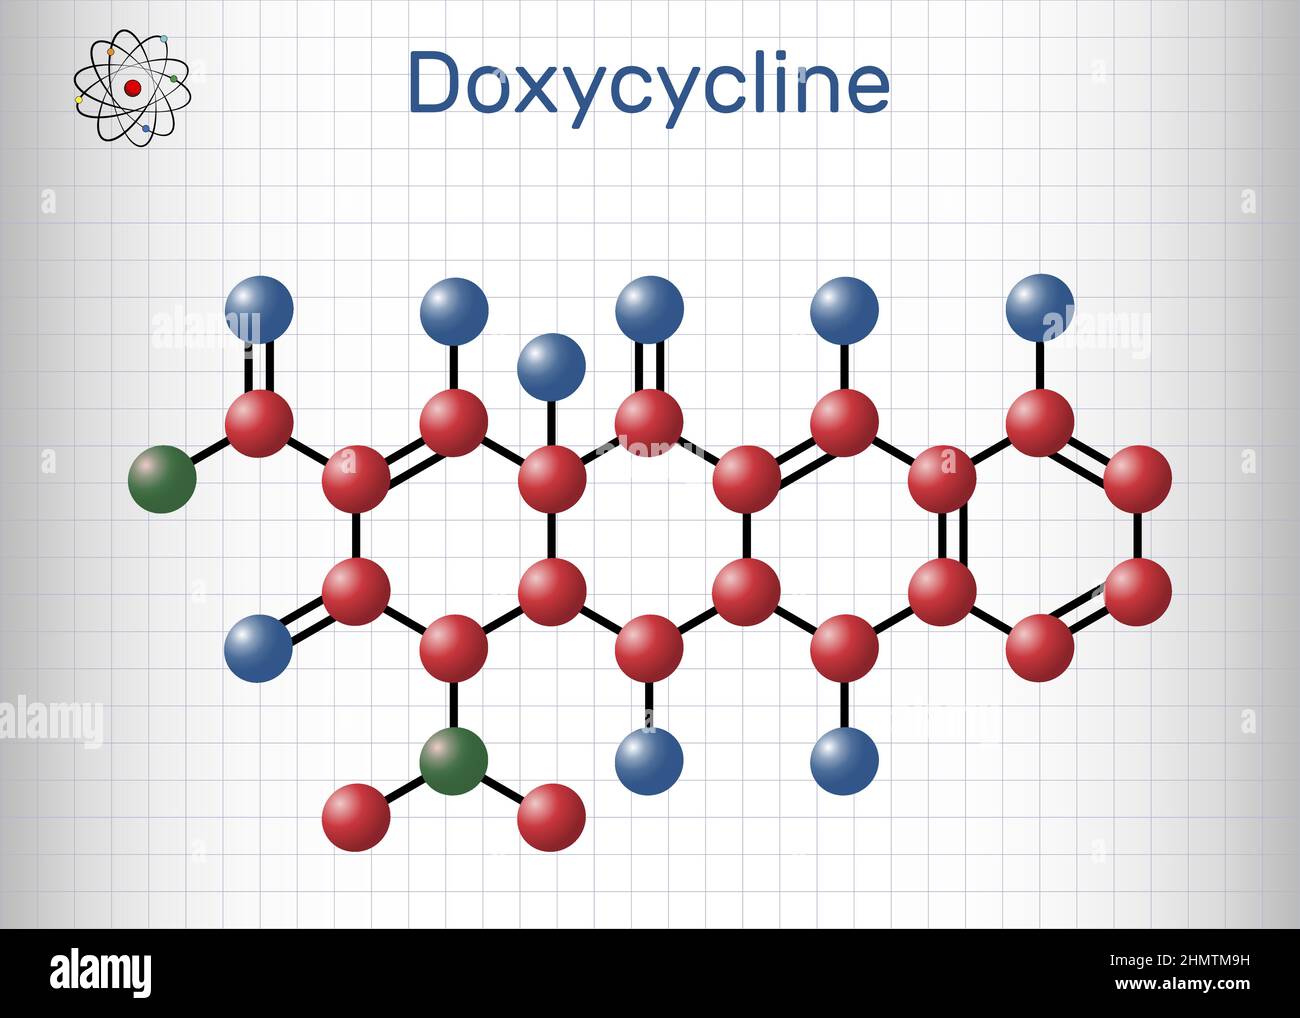 Doxycycline molecule. It is broad-spectrum tetracycline antibiotic used to treat a wide variety of bacterial infections. Molecule model. Sheet of pape Stock Vector